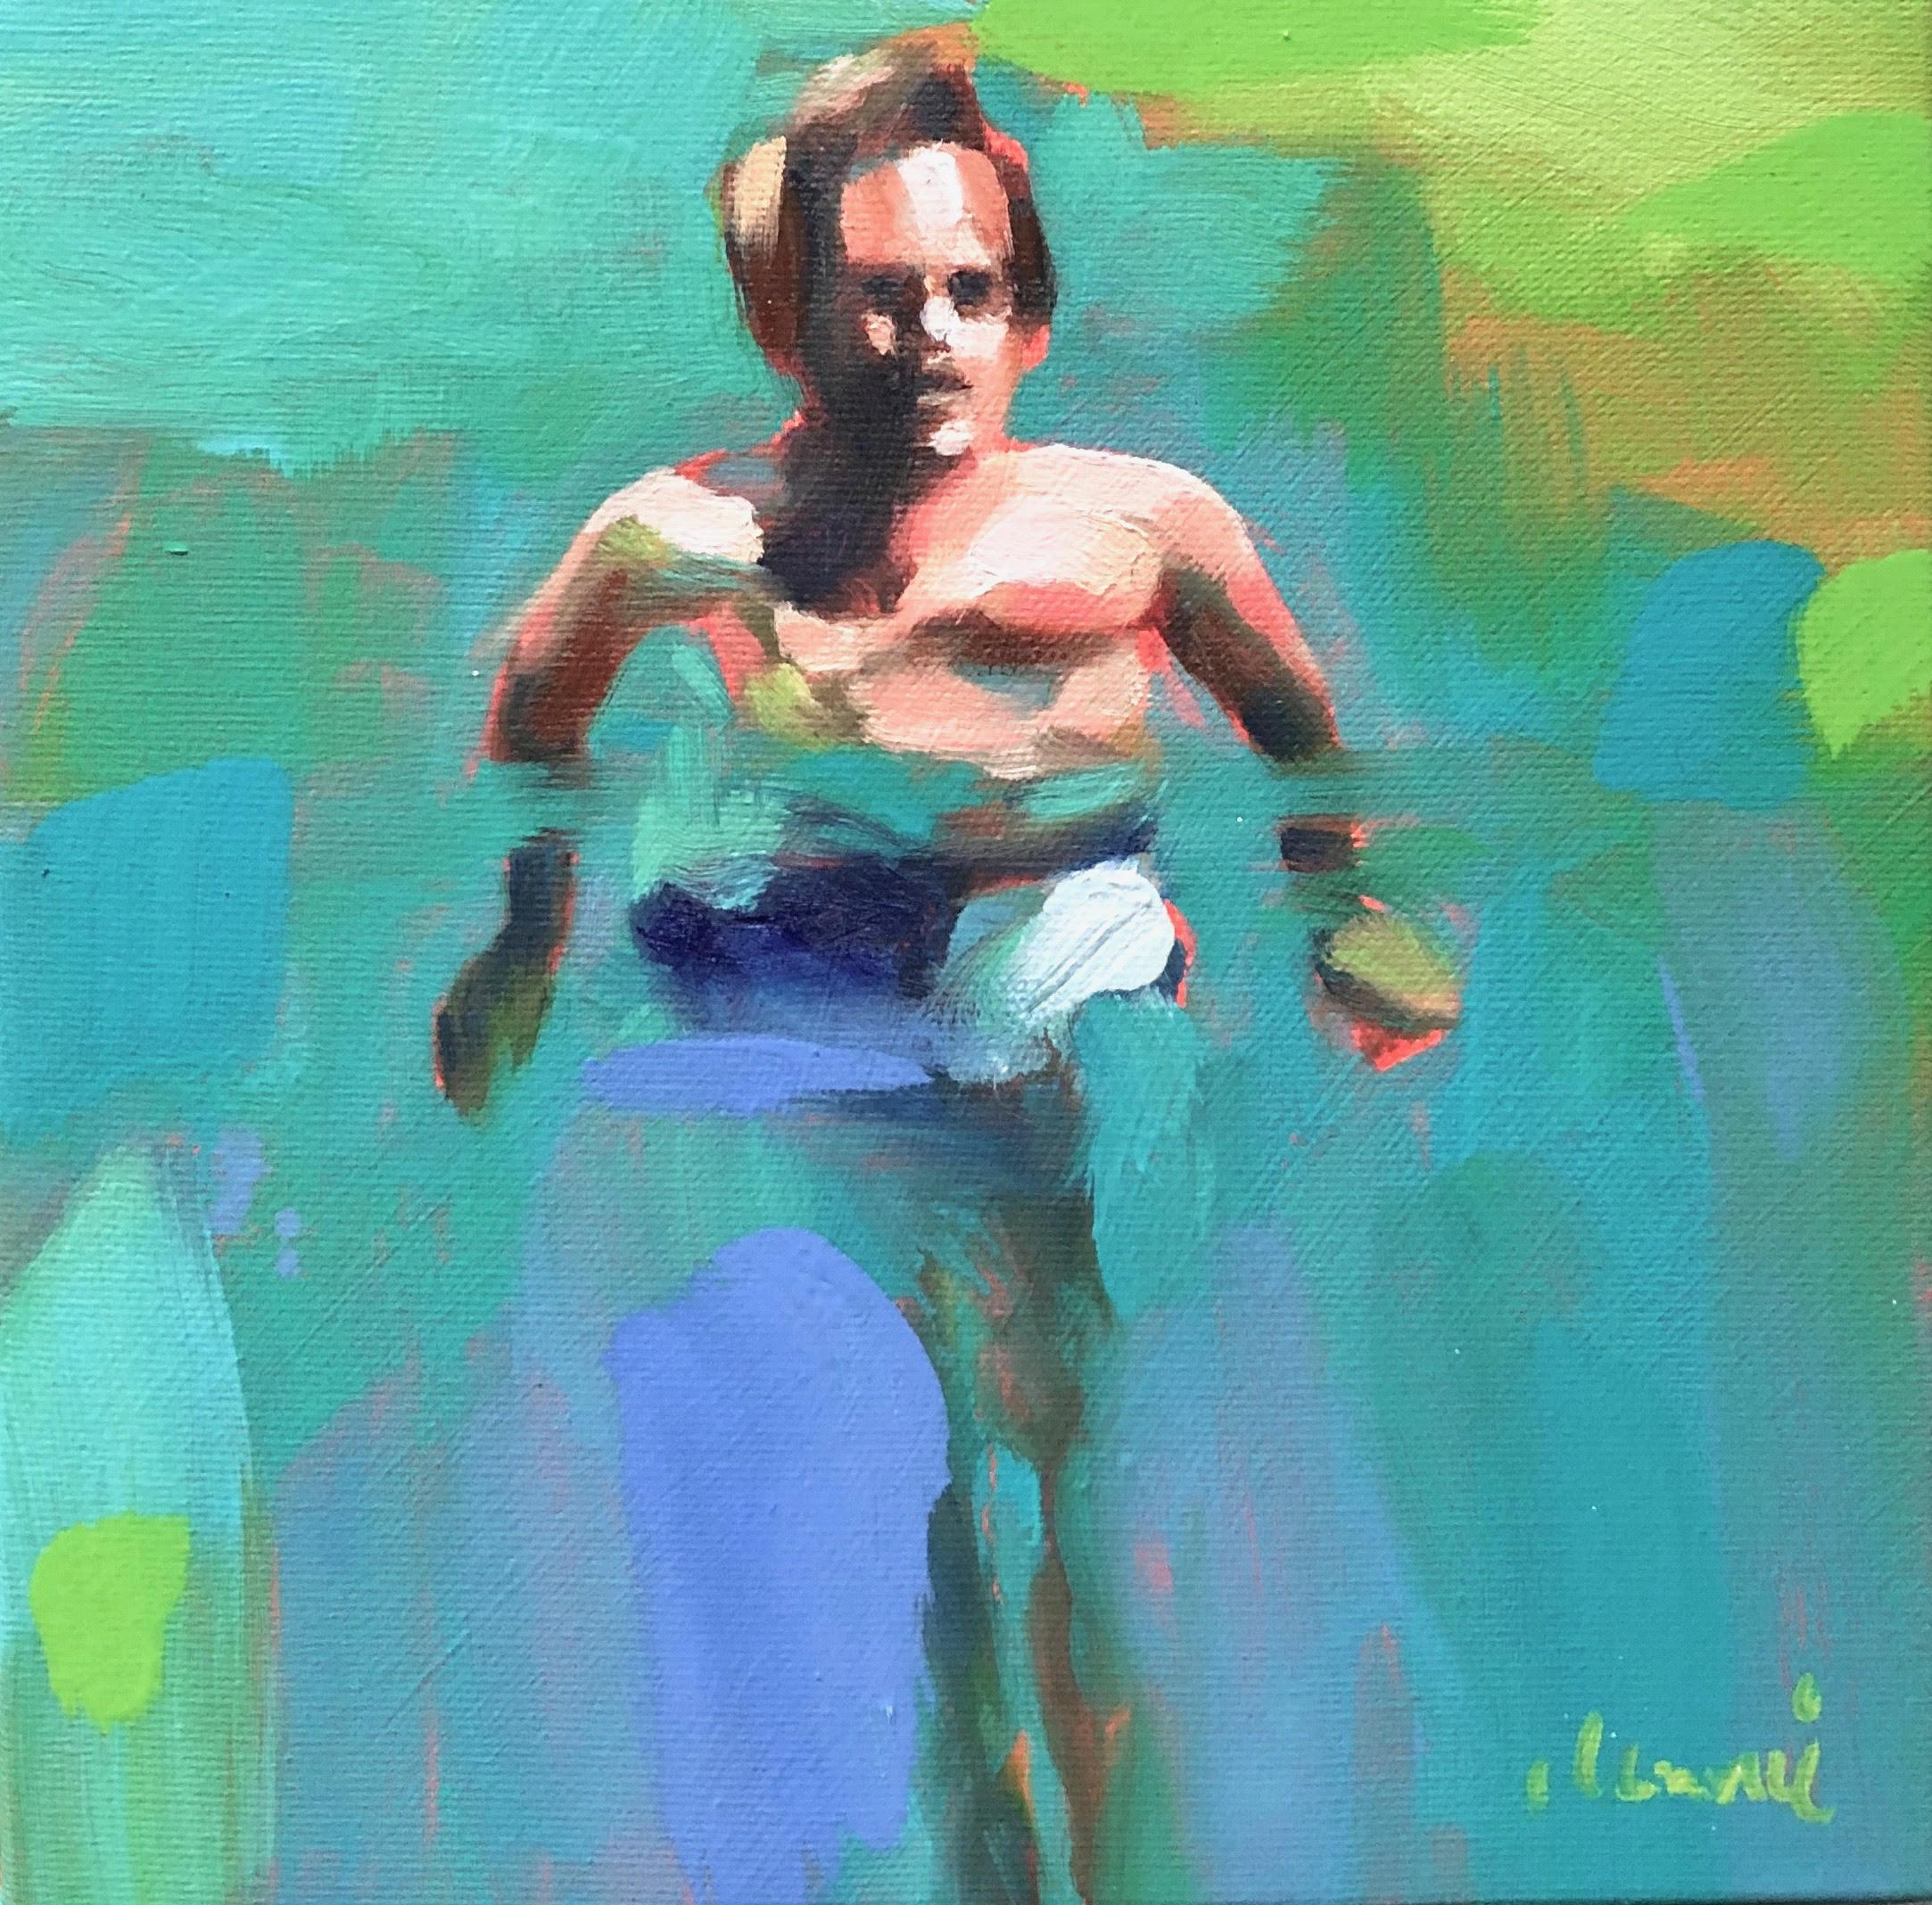 Elizabeth Lennie Abstract Painting - "Mythography 140" oil painting of a man swimming in green and blue water